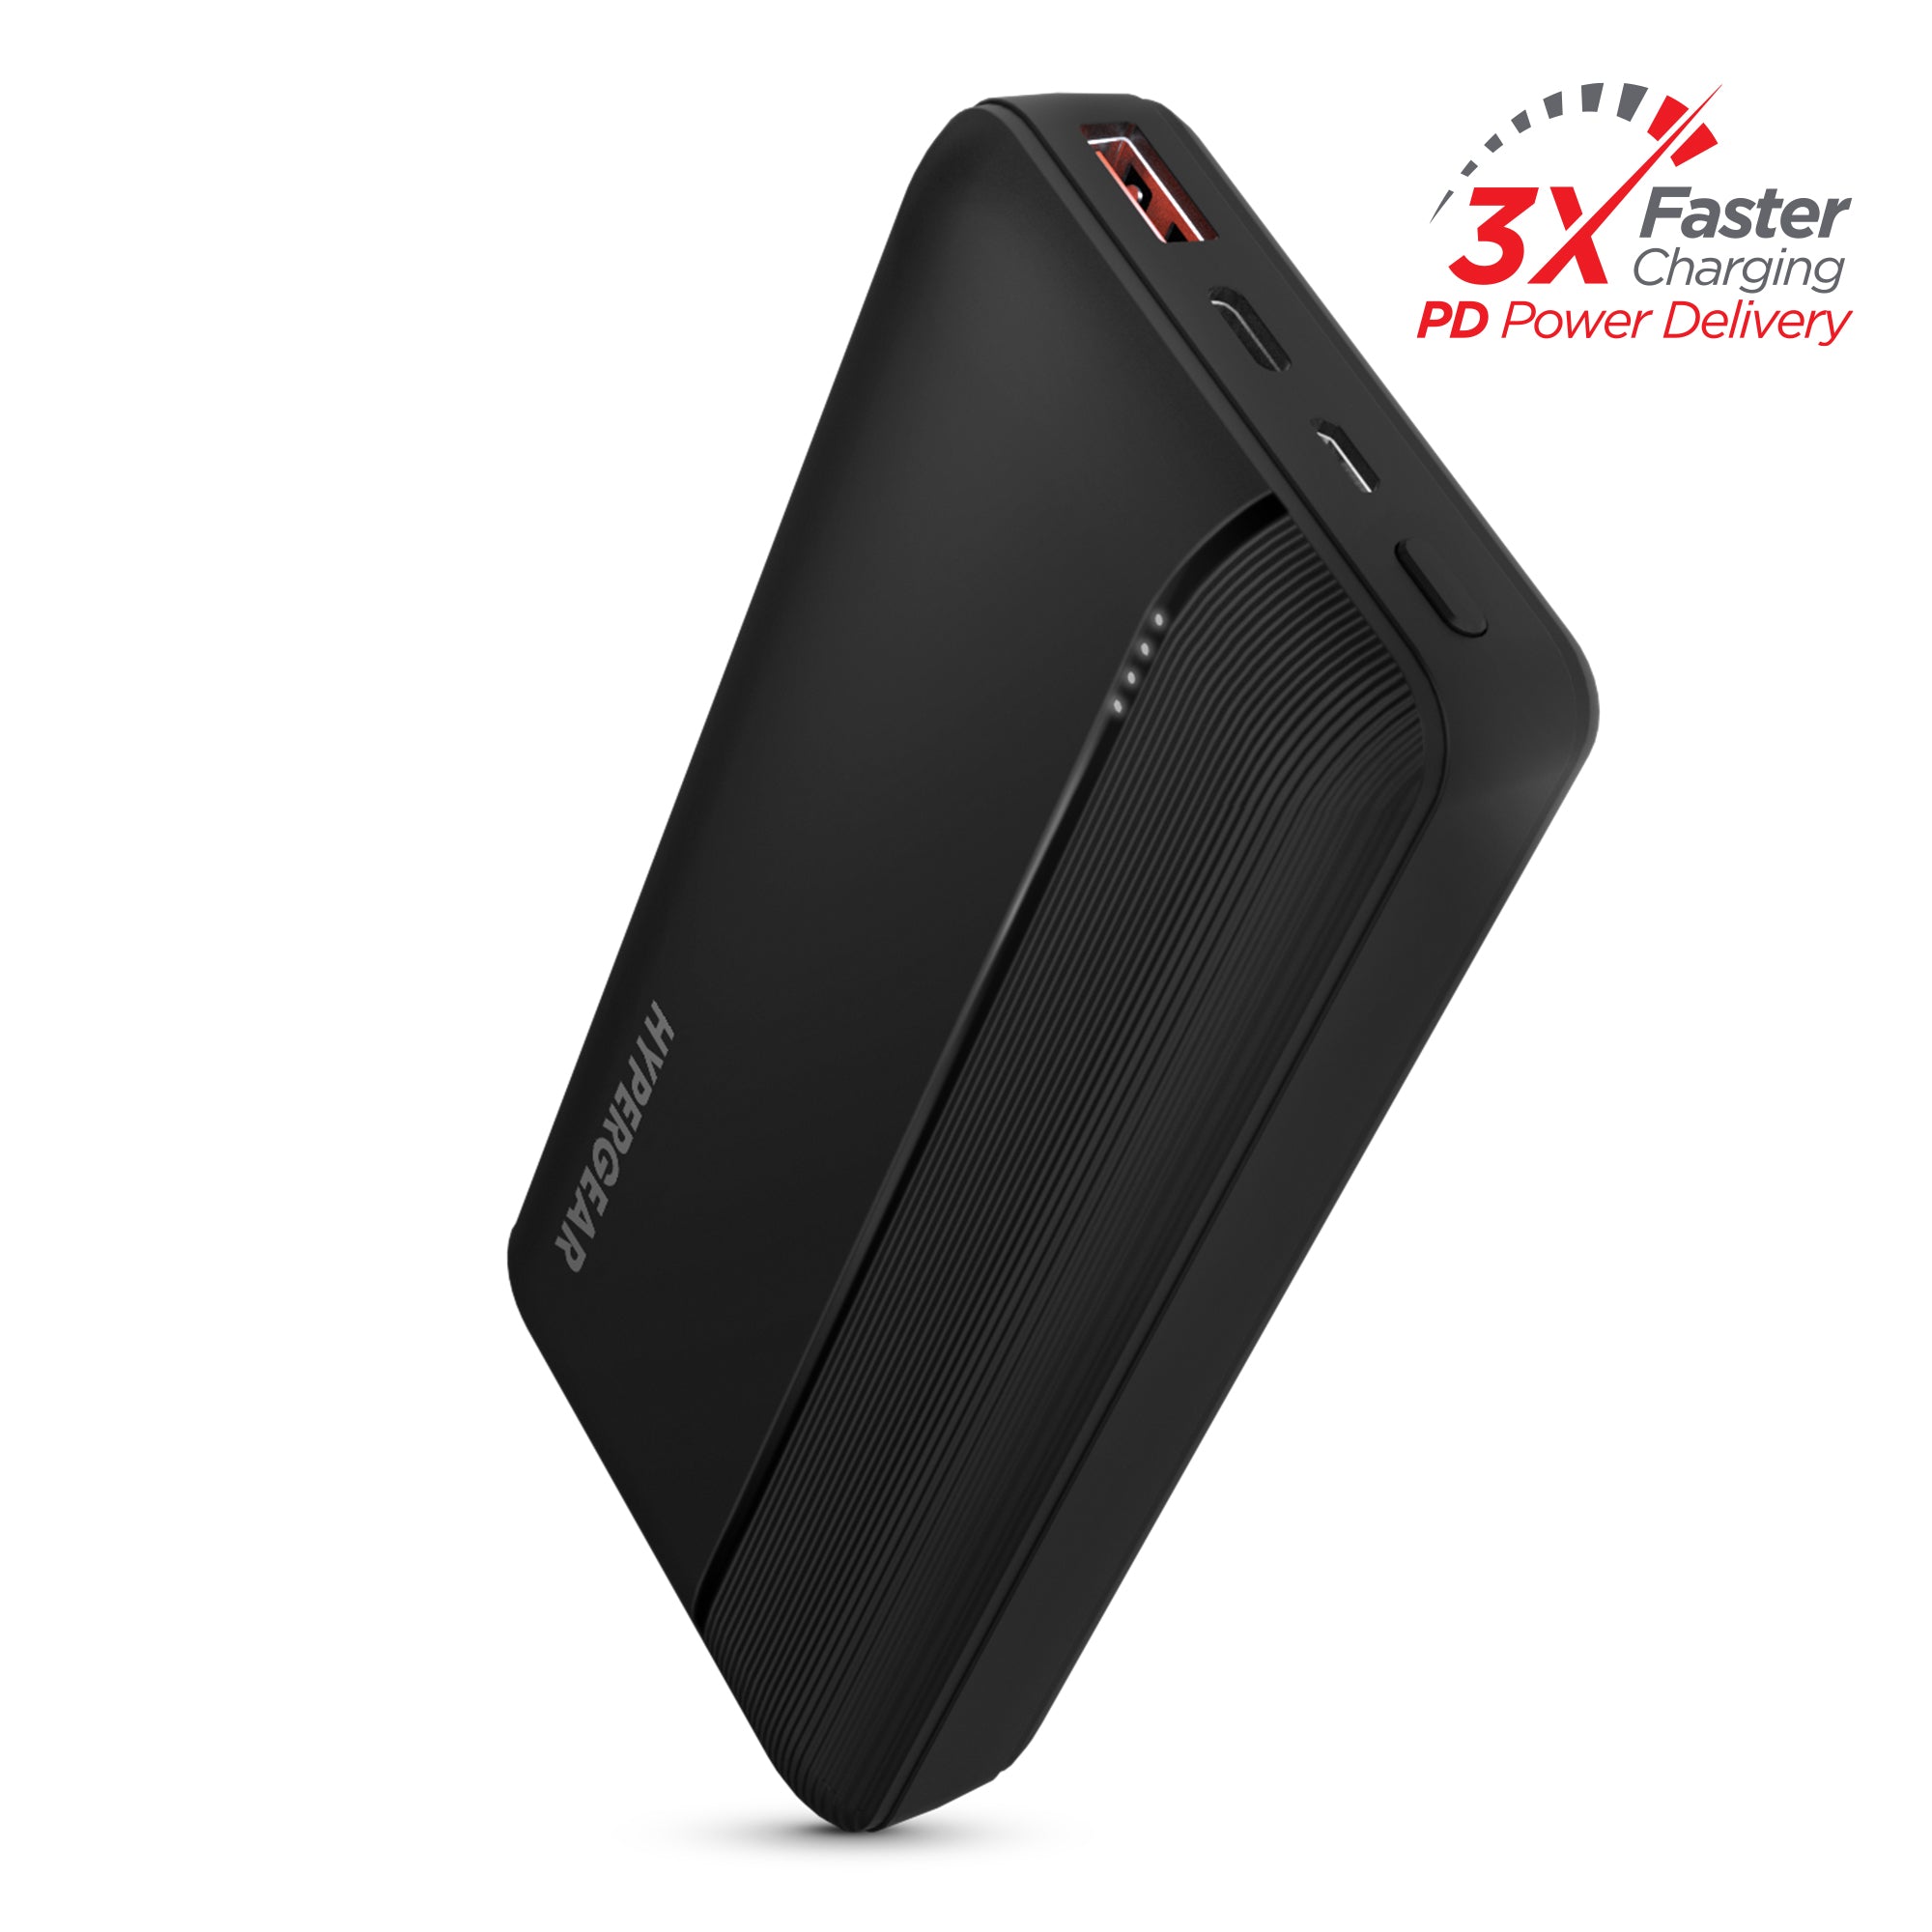 Monoprice Compact 20,000 mAh Power Bank with PD 20W and QC 3.0 Fast  Charging, Built-In Digital LED Display, Compatible with All Mobile Devices  